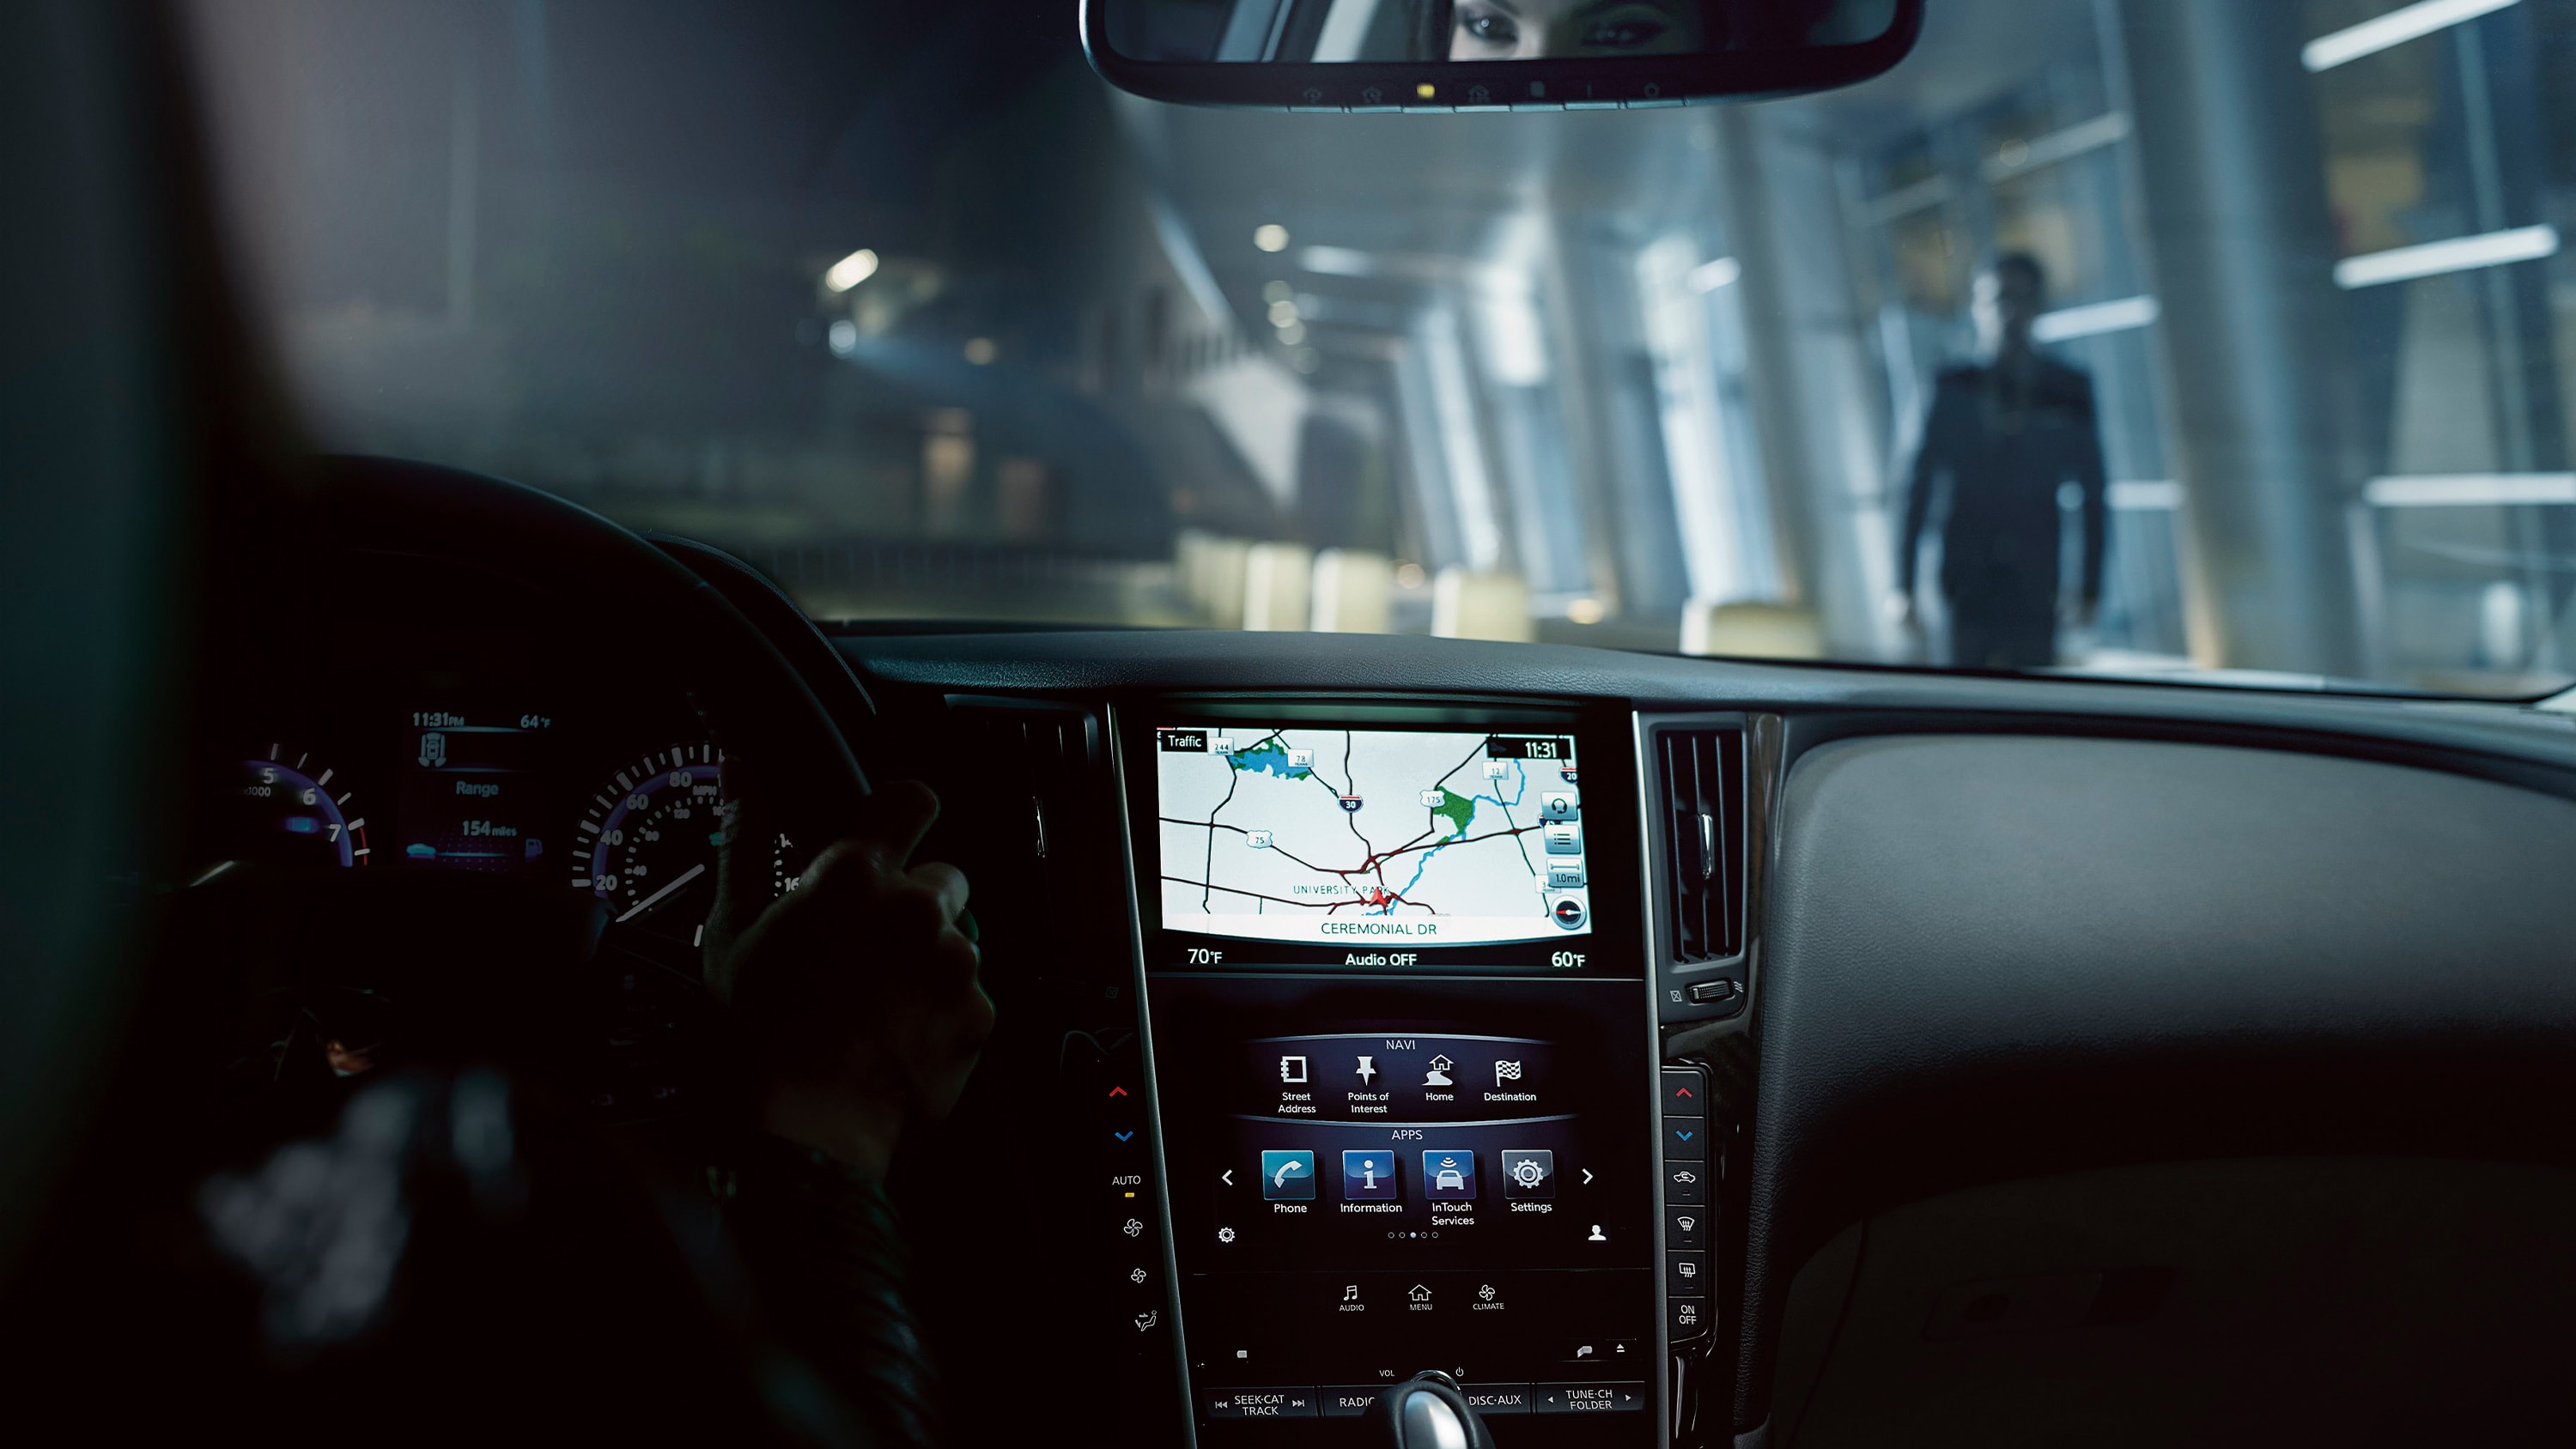 INFINITI InTouch With Navigation Technology | Interior View Of INFINITI Vehicle Equipped With INFINITI InTouch Navigation